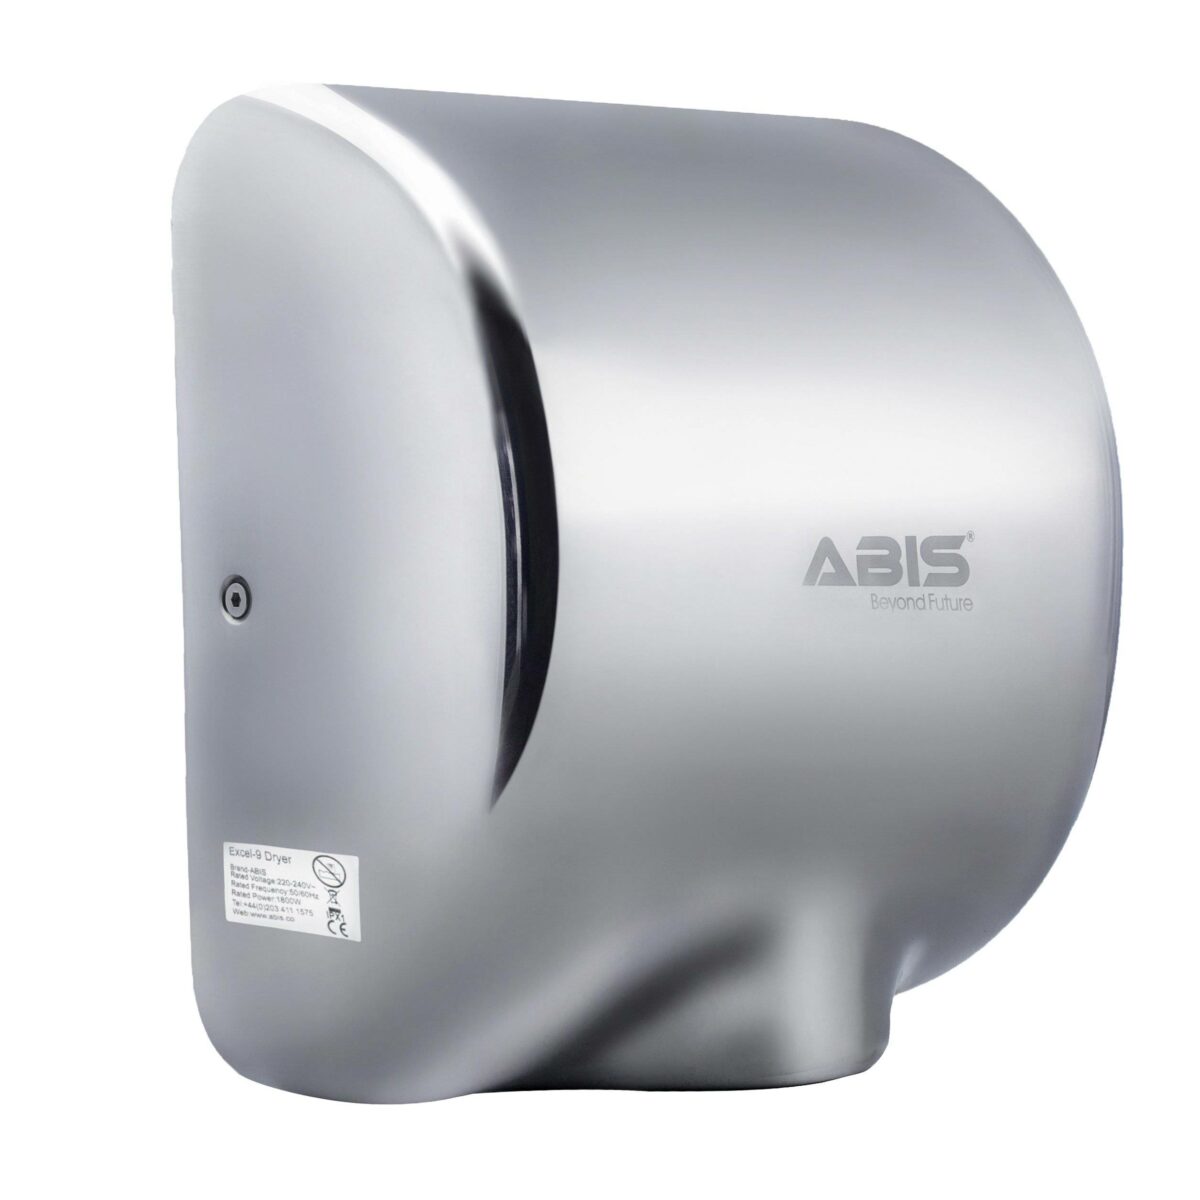 Hand Dryer Commercial Excel-9 Stainless Steel - Chrome - ABIS